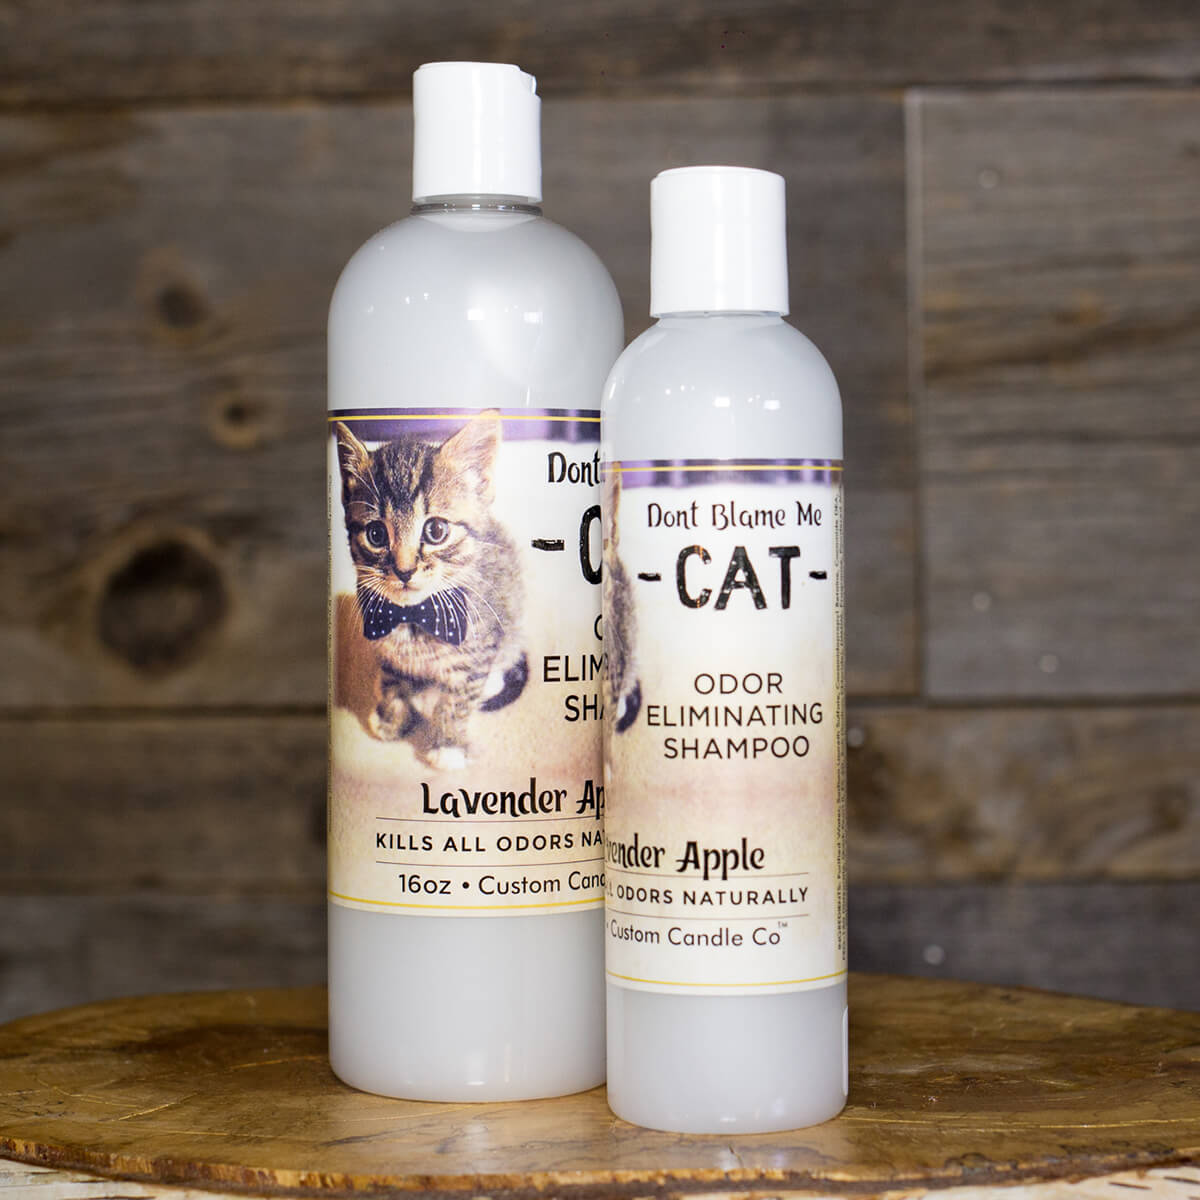 A bottle of Cat Shampoo - Lavender Apple 8oz and 16 oz on a wooden table.